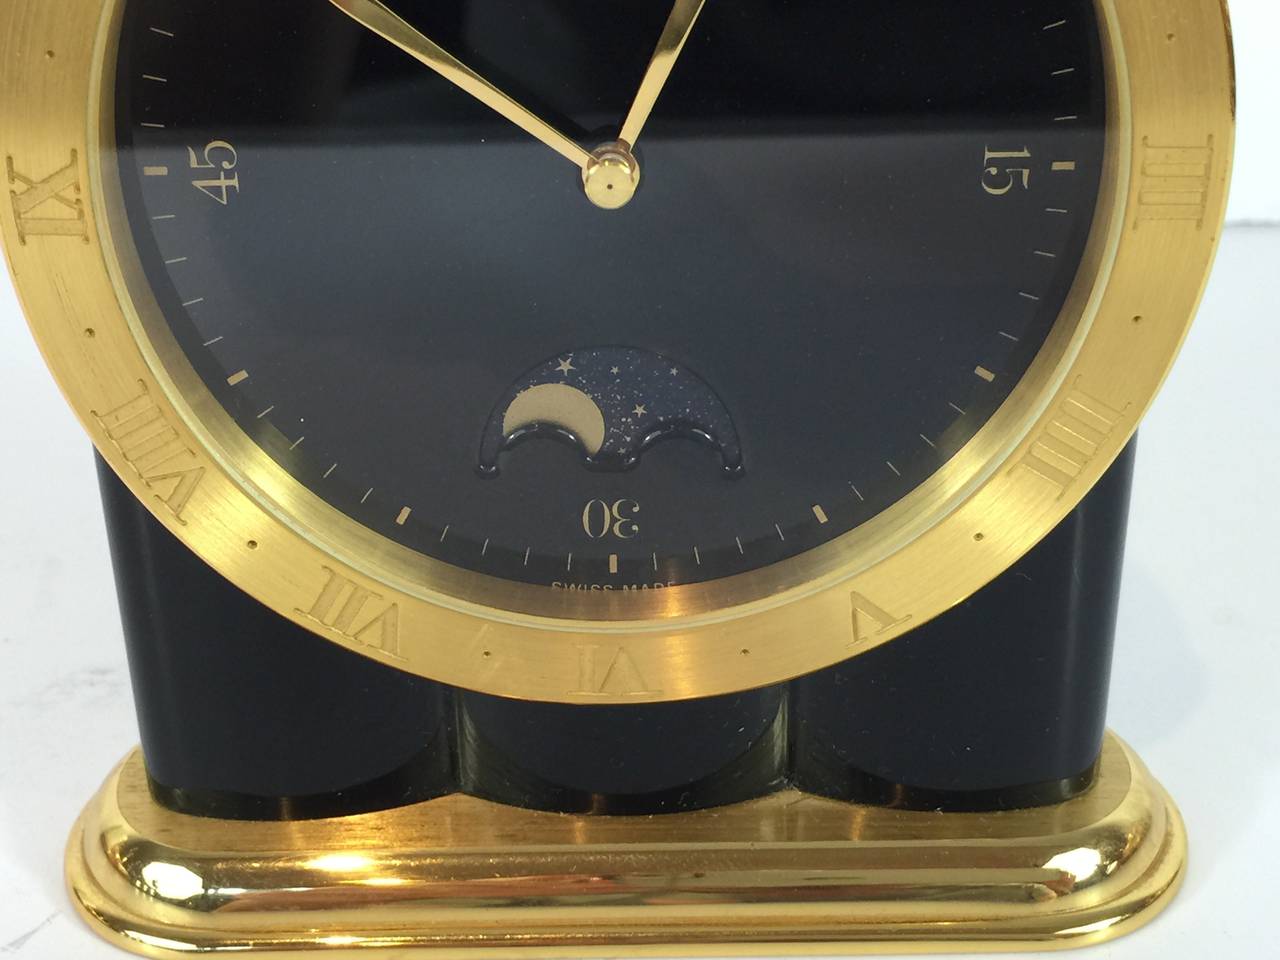 Tiffany & Co. Moon Phase Desk Clock, Swiss made battery movement, Gilt Bronze and Onyx case